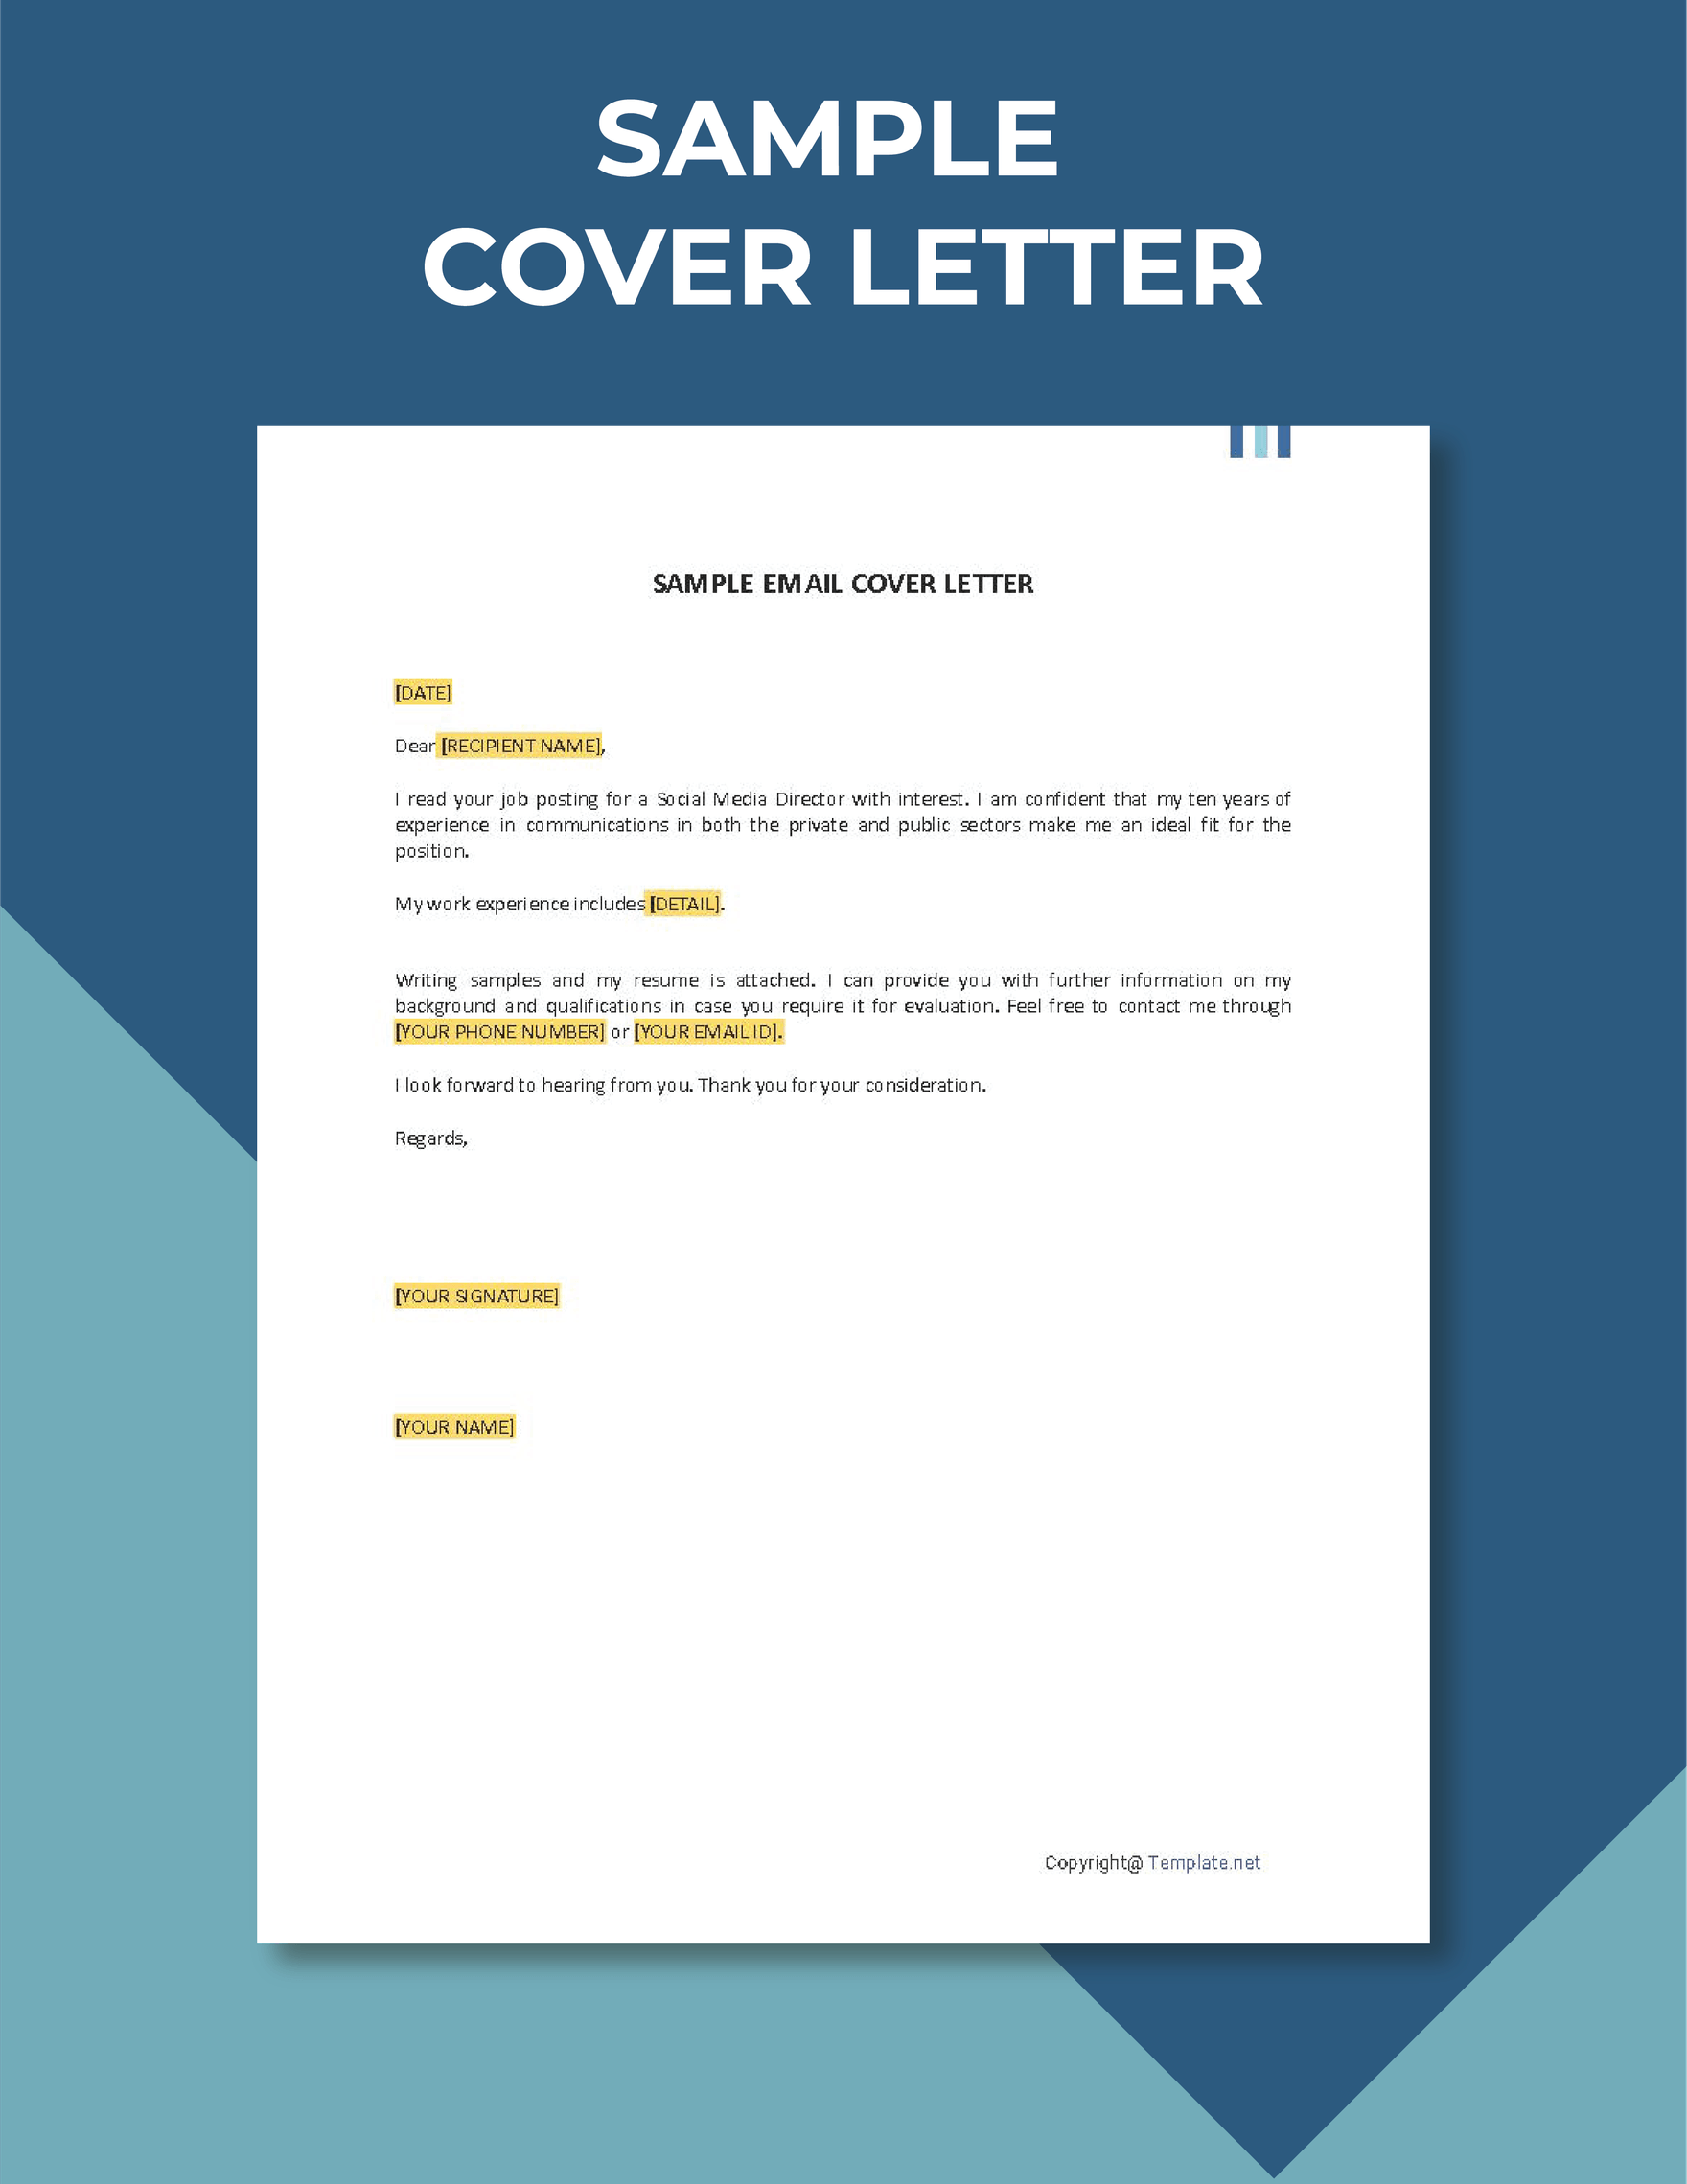 Sample Email Cover Letter